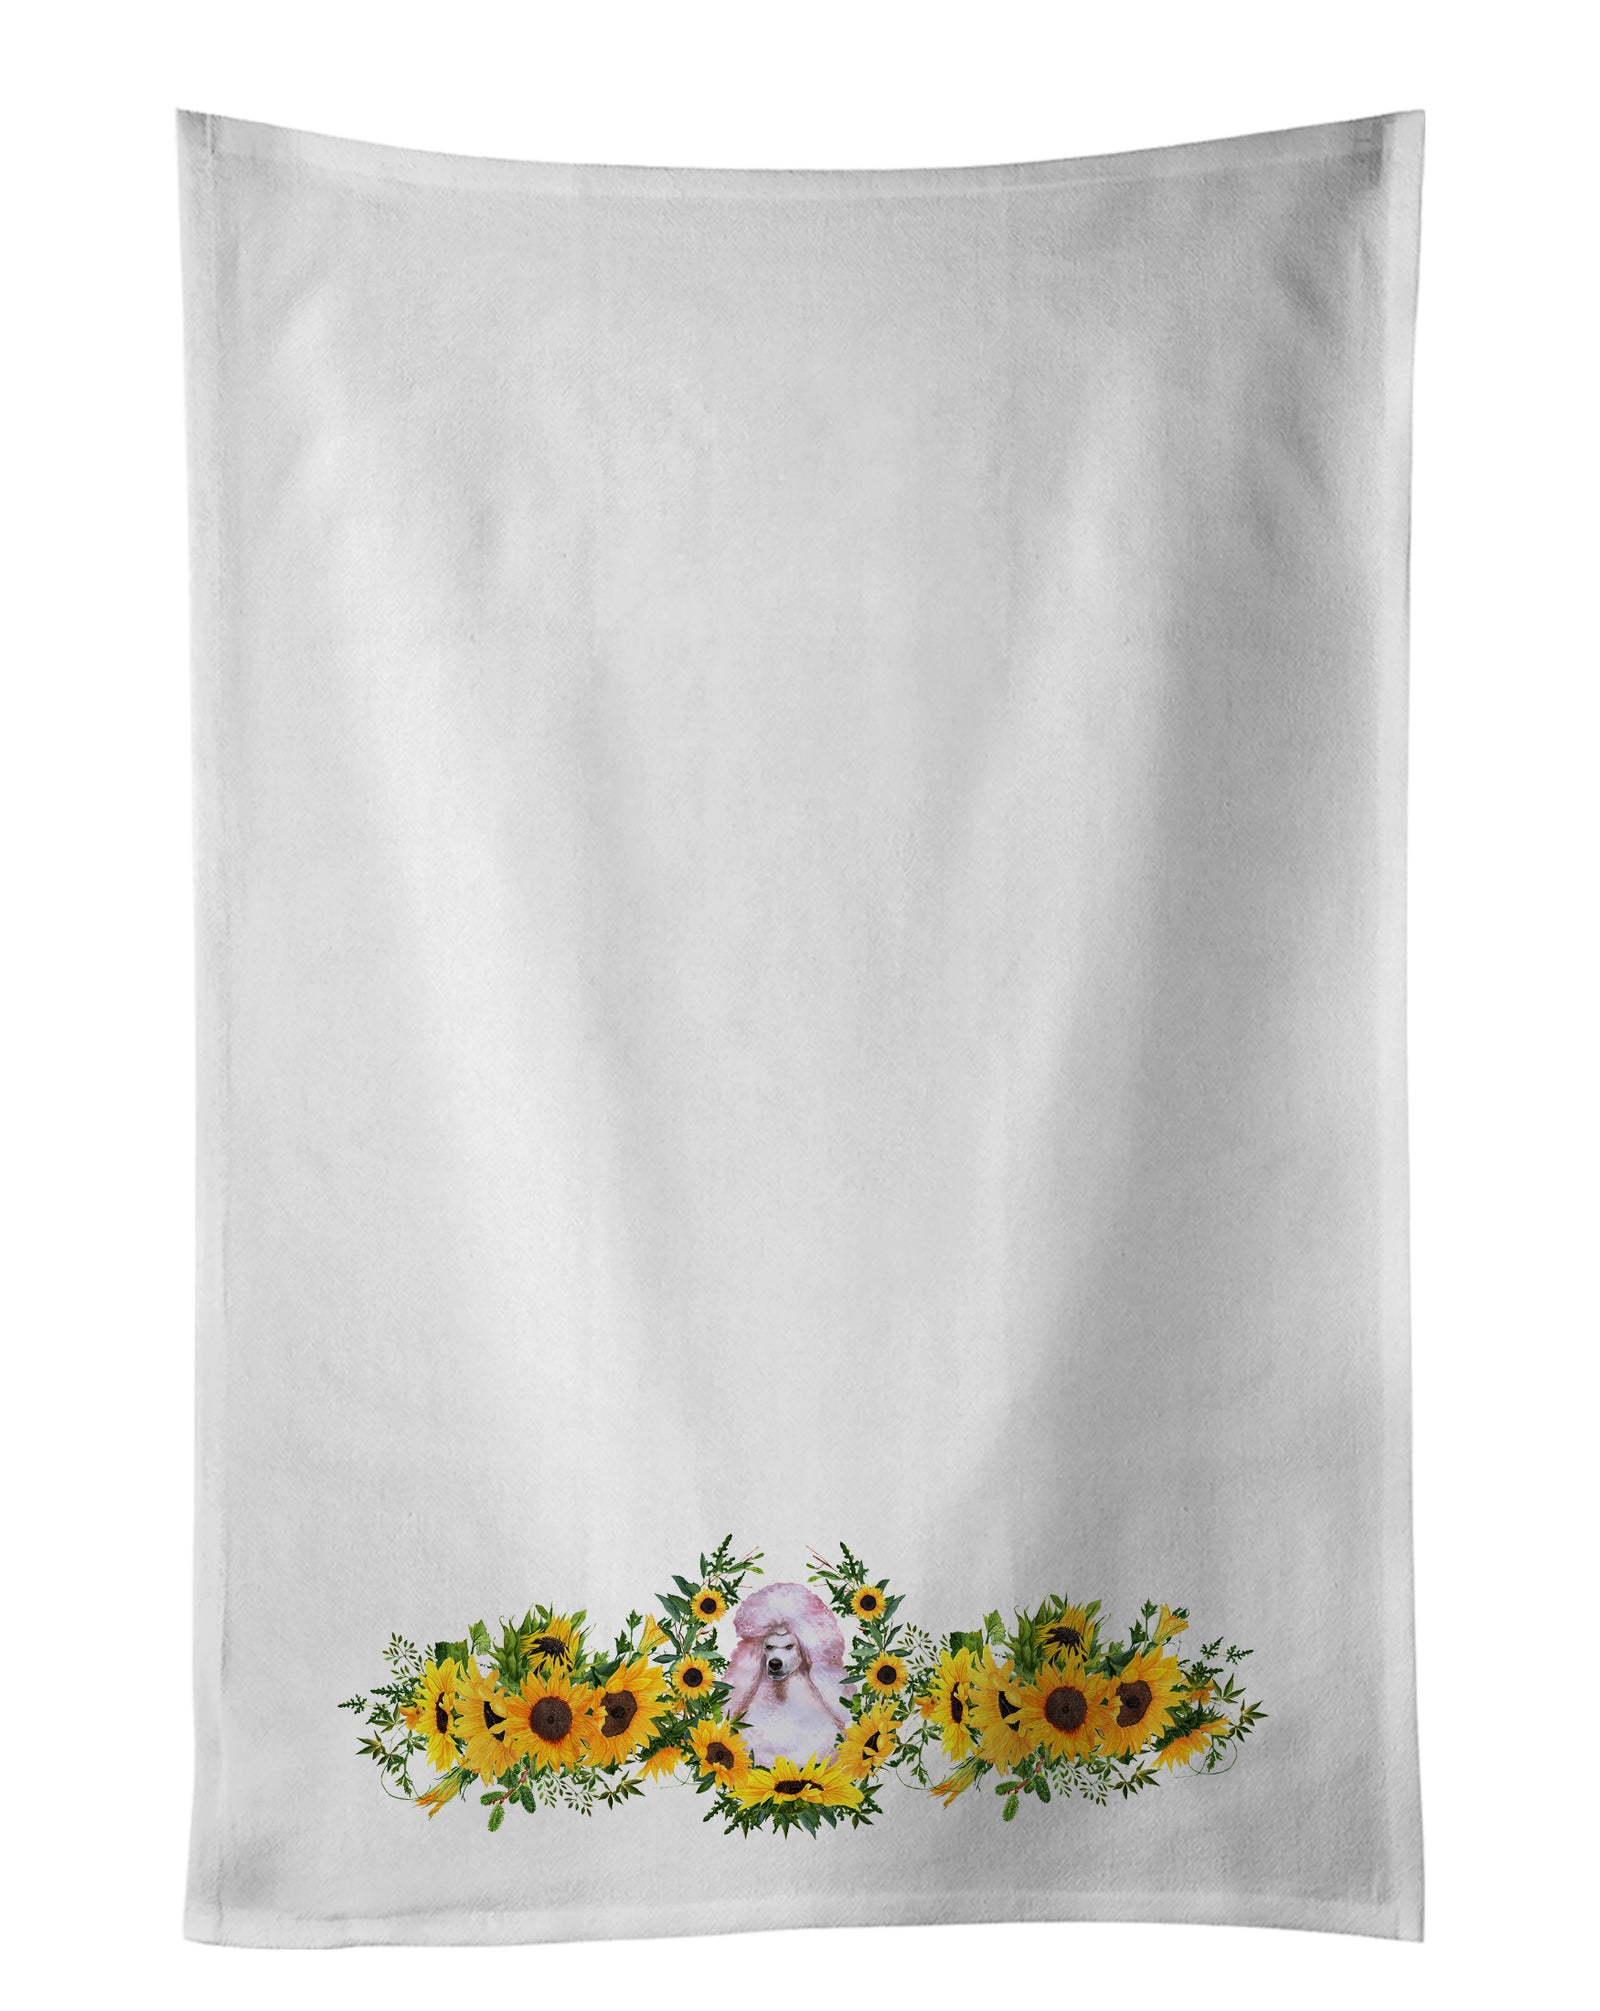 Buy this White Standard Poodle in Sunflowers White Kitchen Towel Set of 2